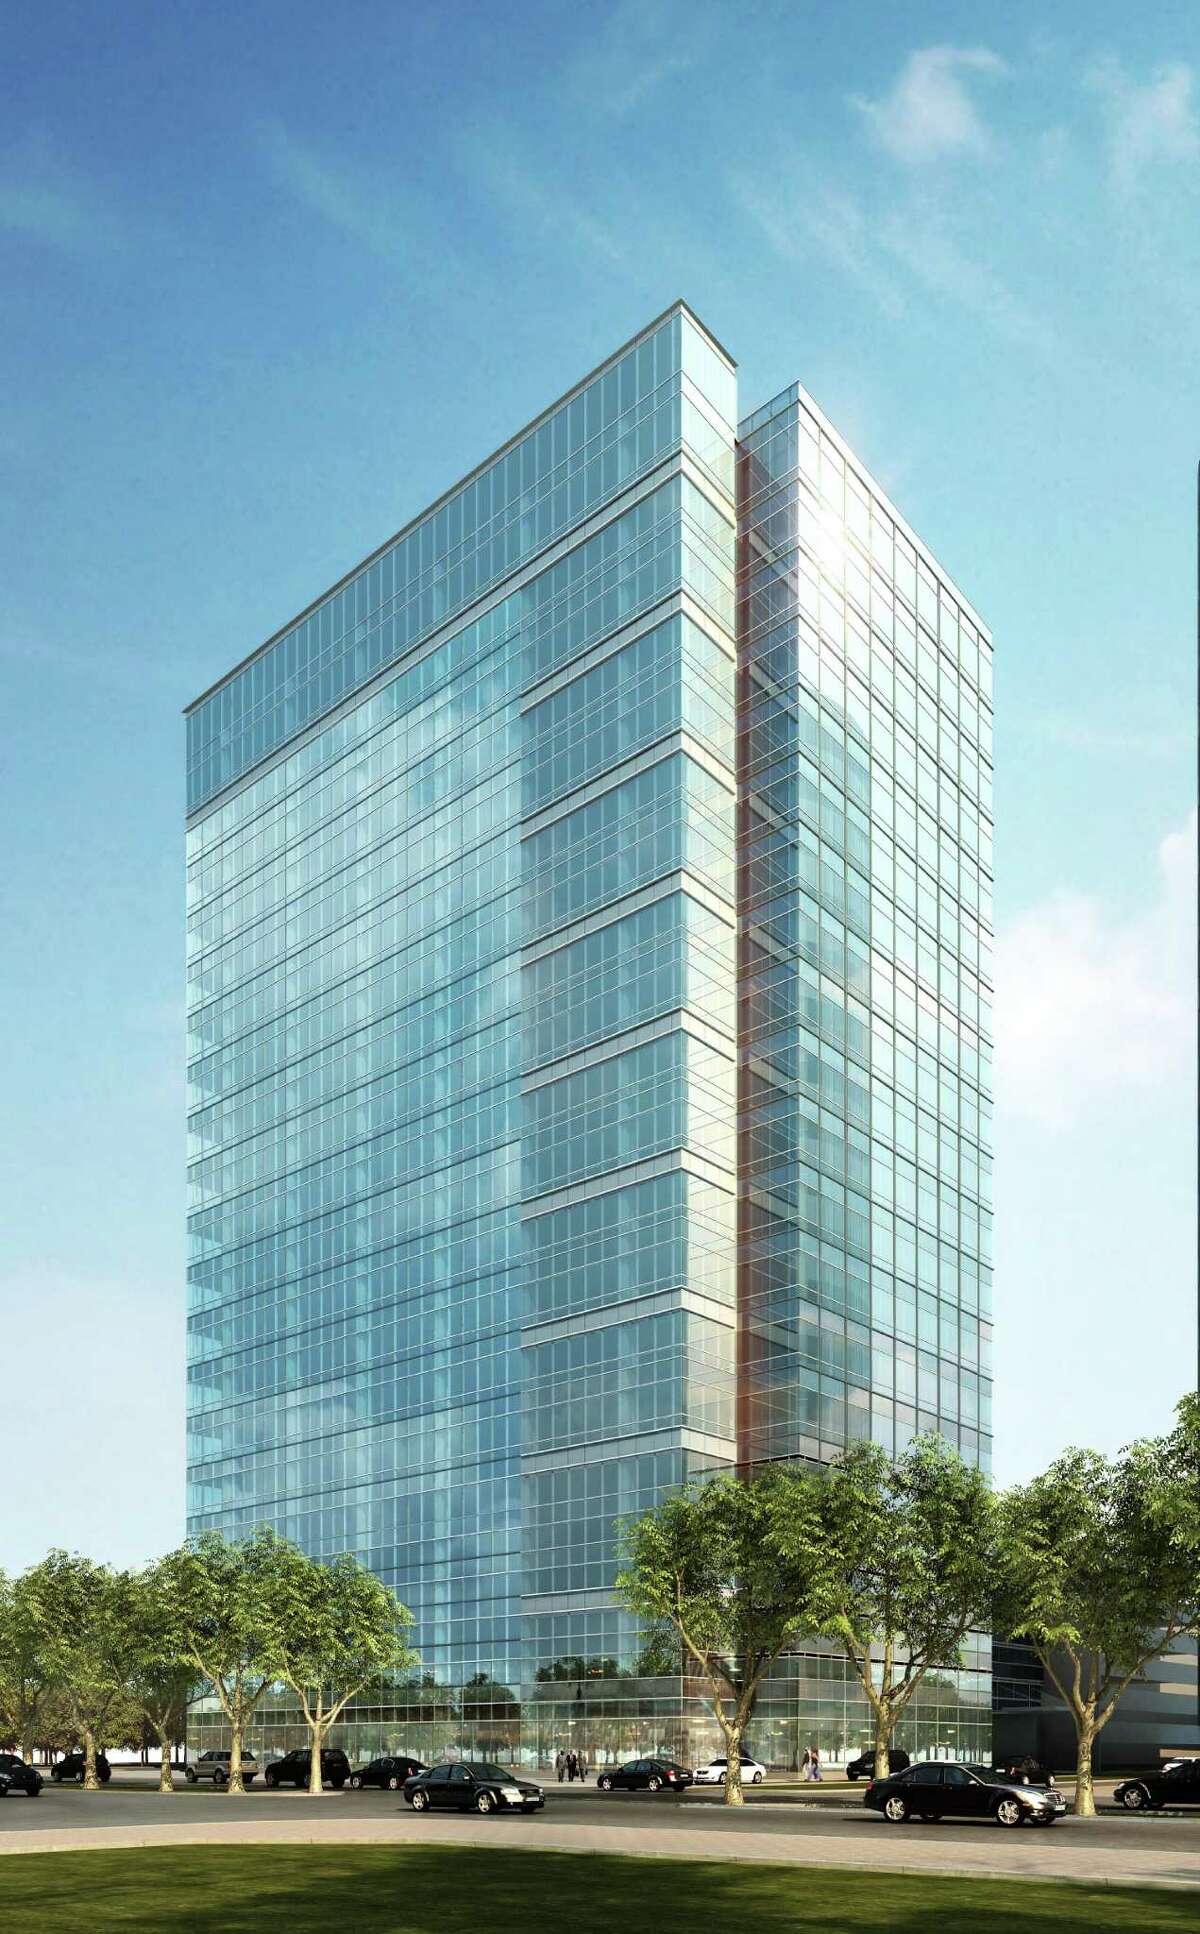 Millennium II will be 22 stories. It is being built on 3 acres at 10353 Richmond, next to the Millennium Tower.